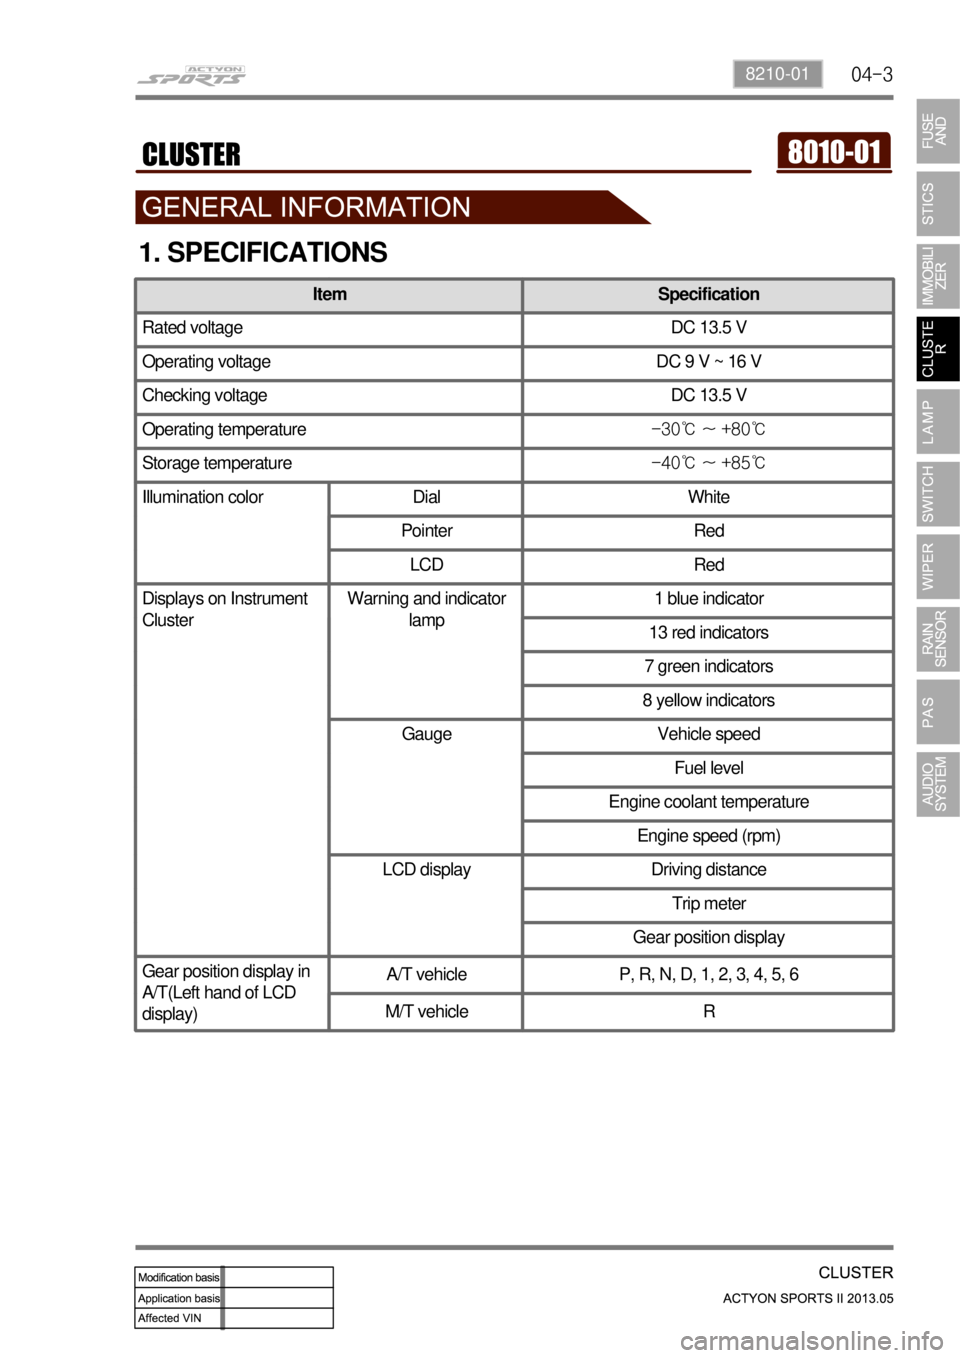 SSANGYONG NEW ACTYON SPORTS 2013  Service Manual 04-38210-01
1. SPECIFICATIONS
Item Specification
Rated voltage DC 13.5 V
Operating voltage DC 9 V ~ 16 V
Checking voltage DC 13.5 V
Operating temperature-30℃ ~ +80℃
Storage temperature-40℃ ~ +85